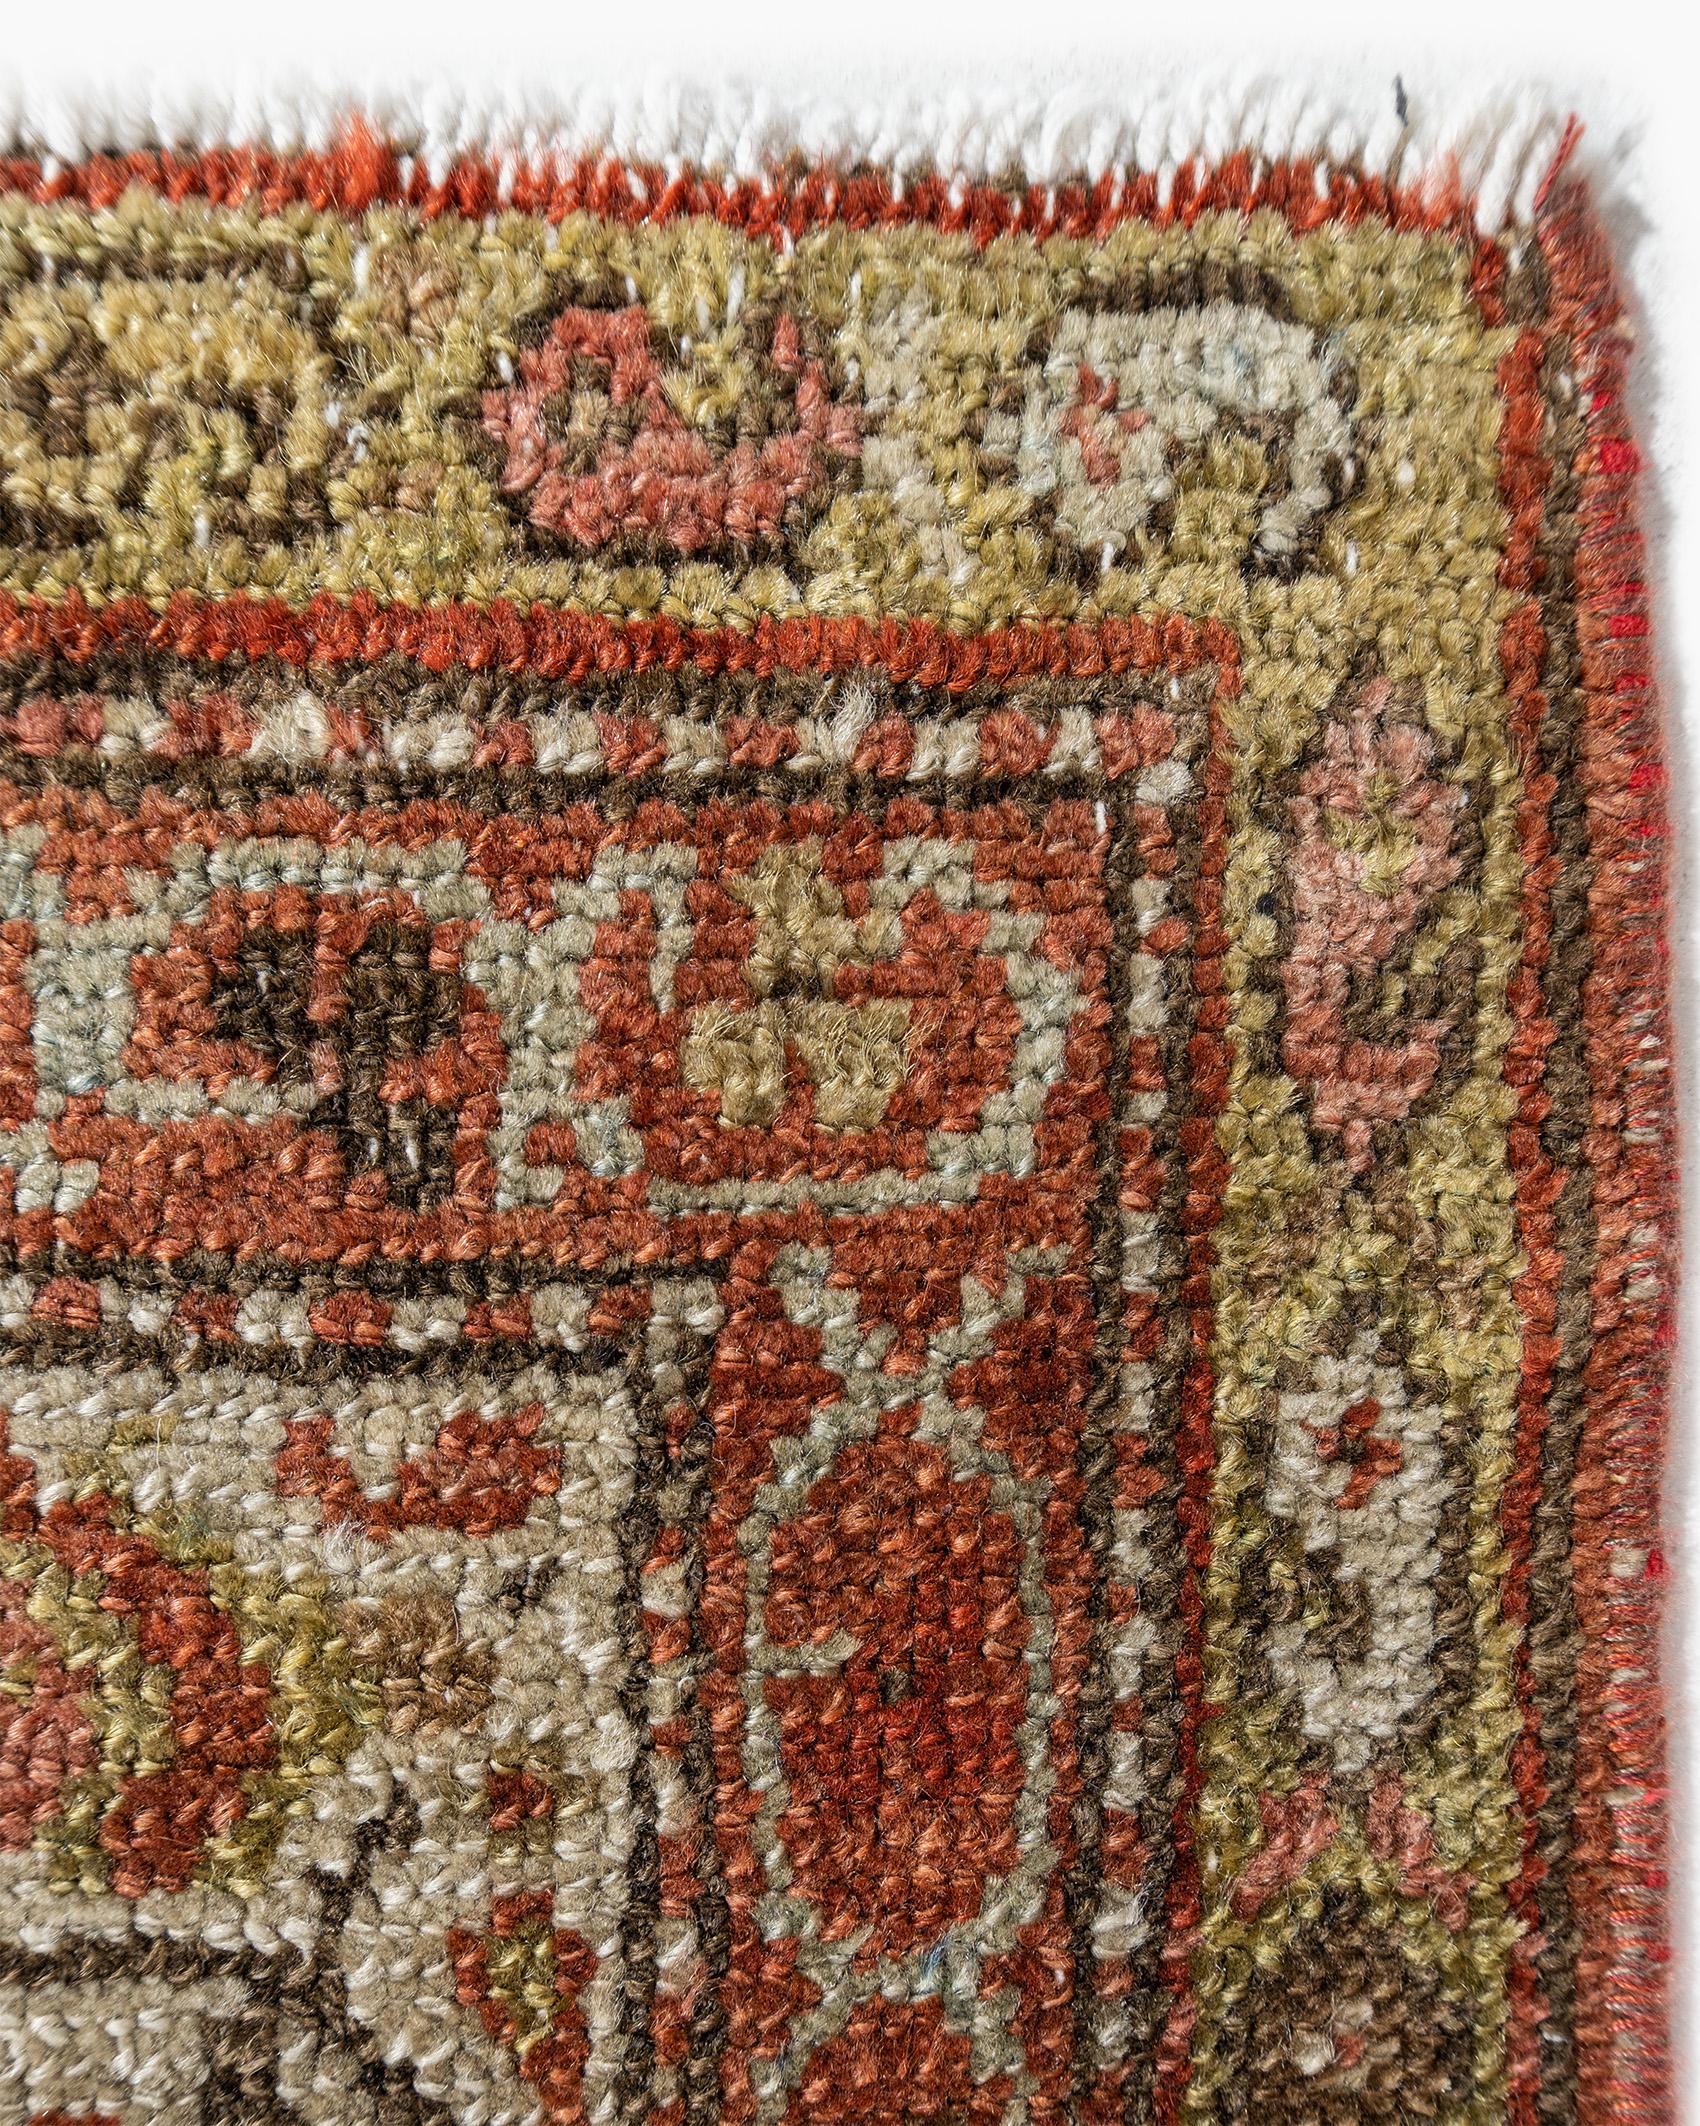 Antique Persian Malayer Runner 5'3 X 12'2. Rugs from Malayer, east of Hamadan, could be considered top quality Hamadan’s and they share similar structural aspects. Colors: interchanging taupe gray ground/ivory/blues/terracotta.

